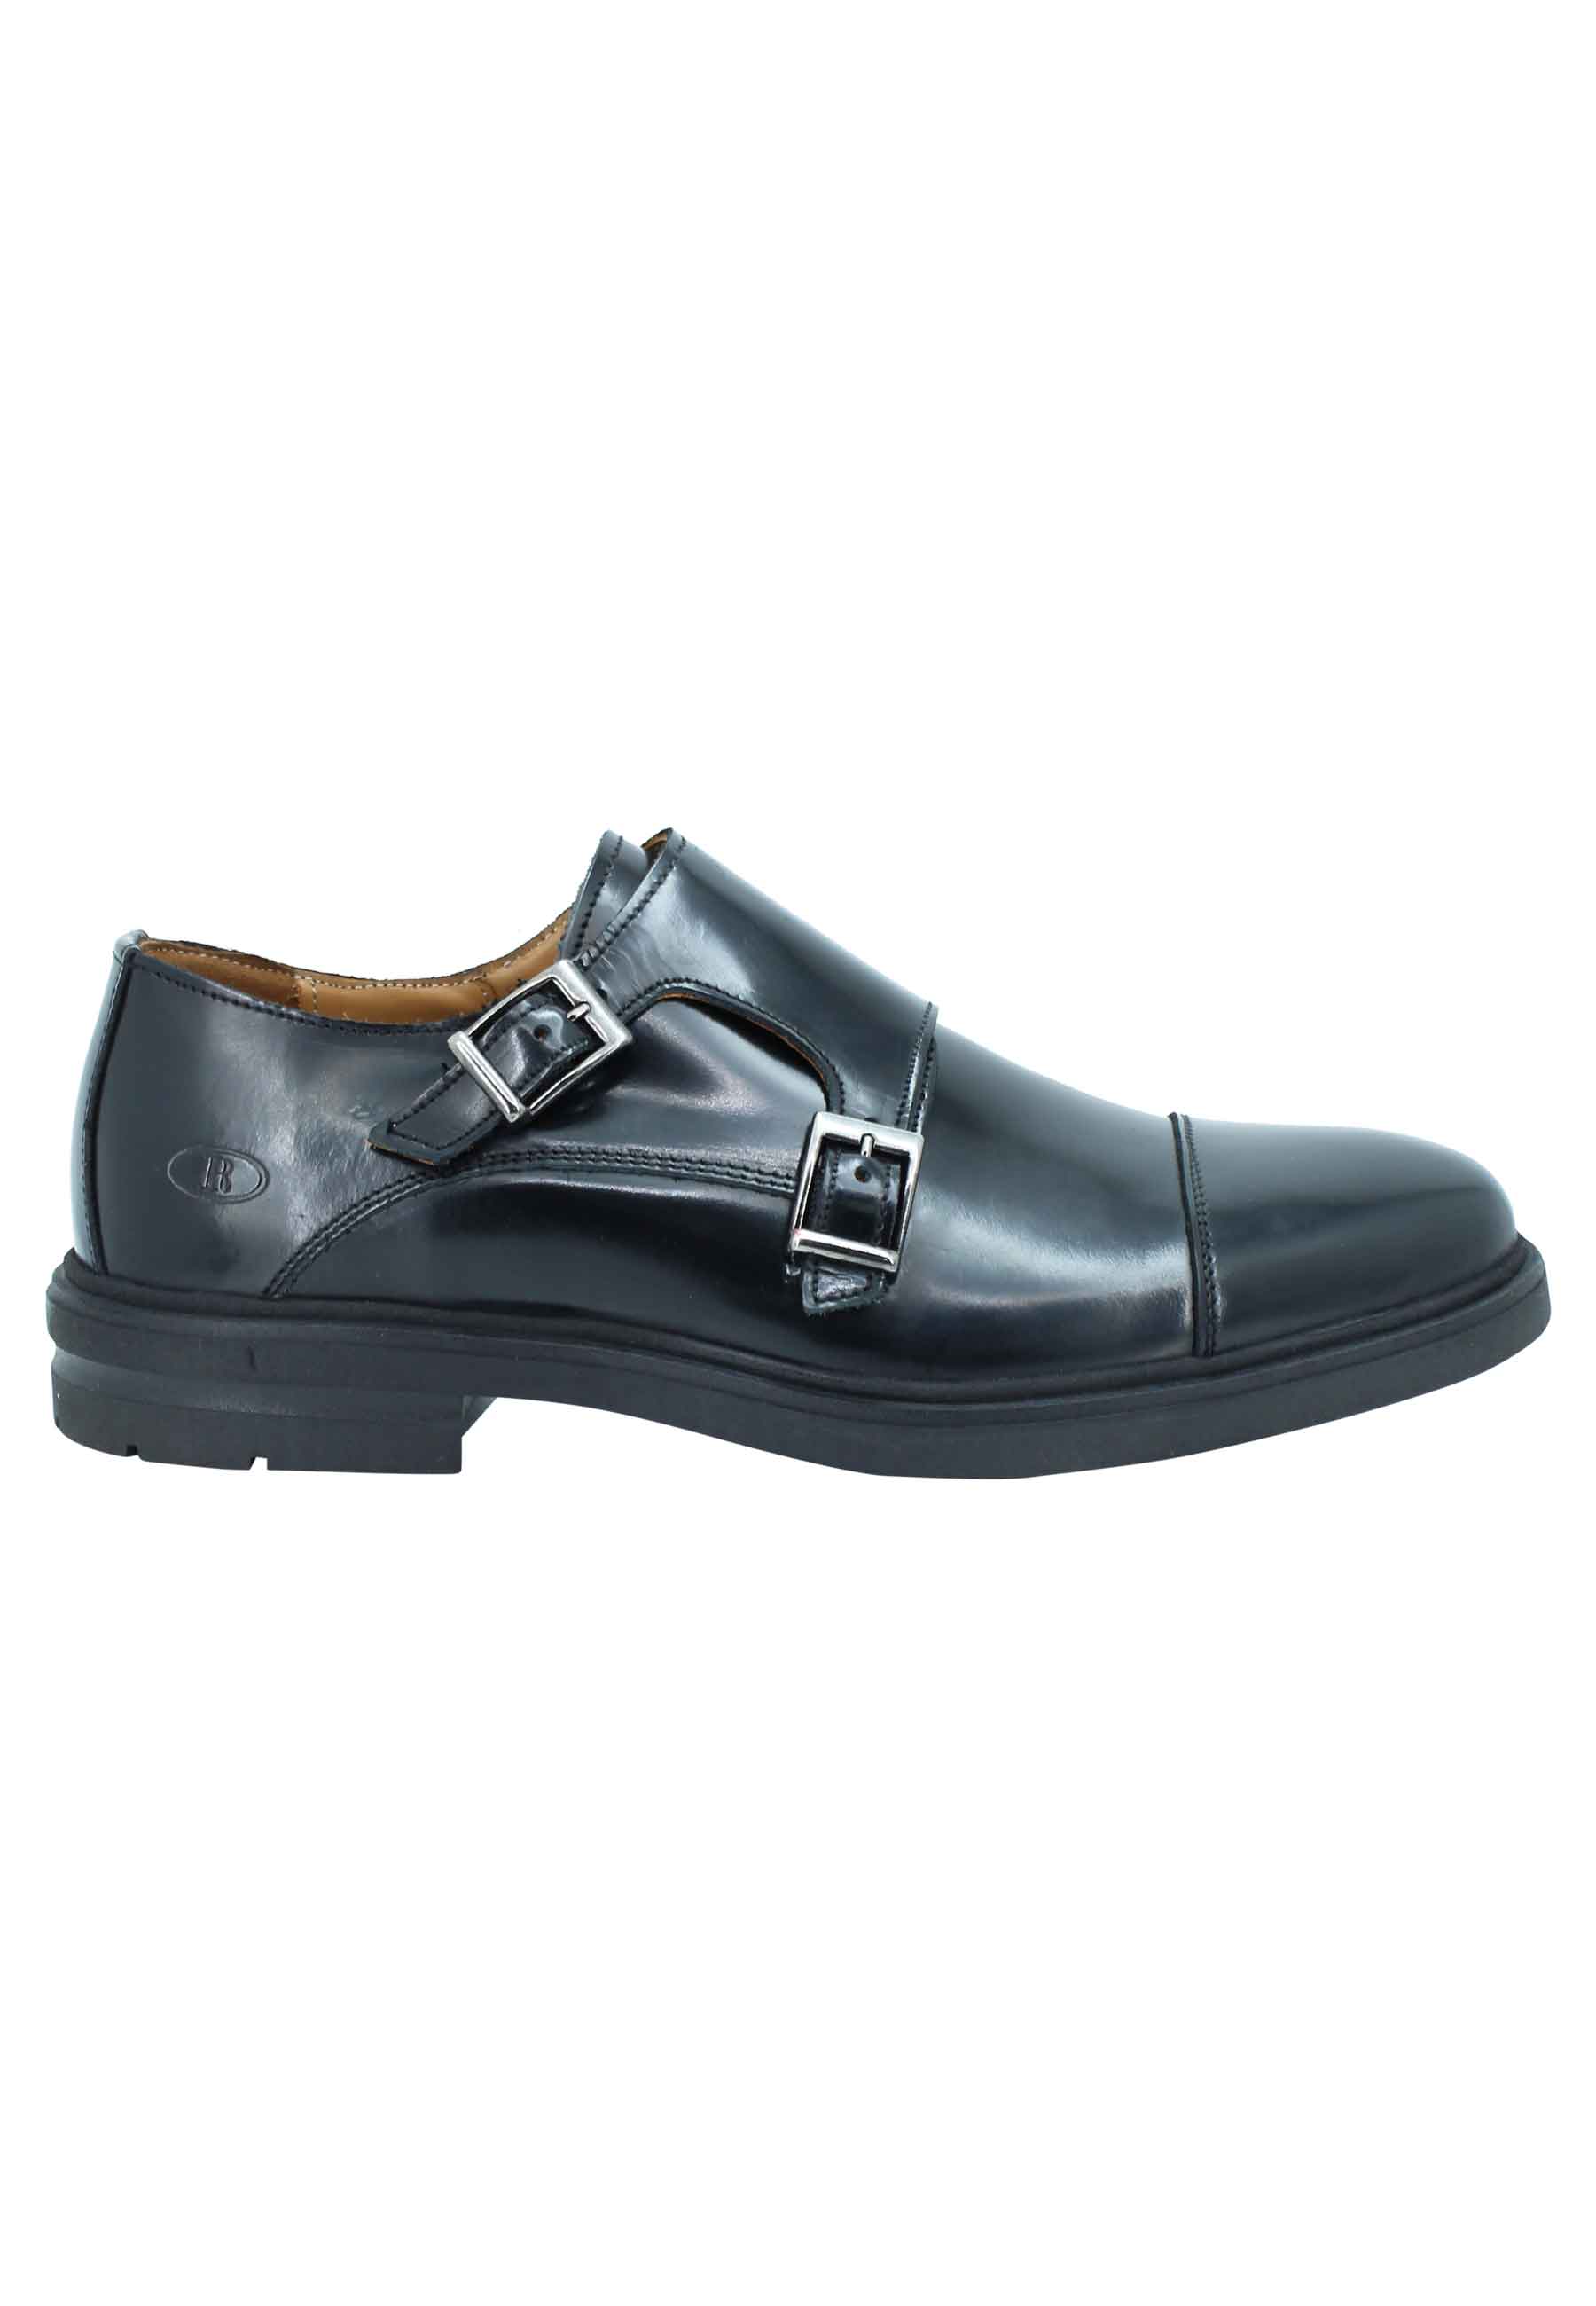 Men's diplomatic loafers in black shiny leather with rubber sole